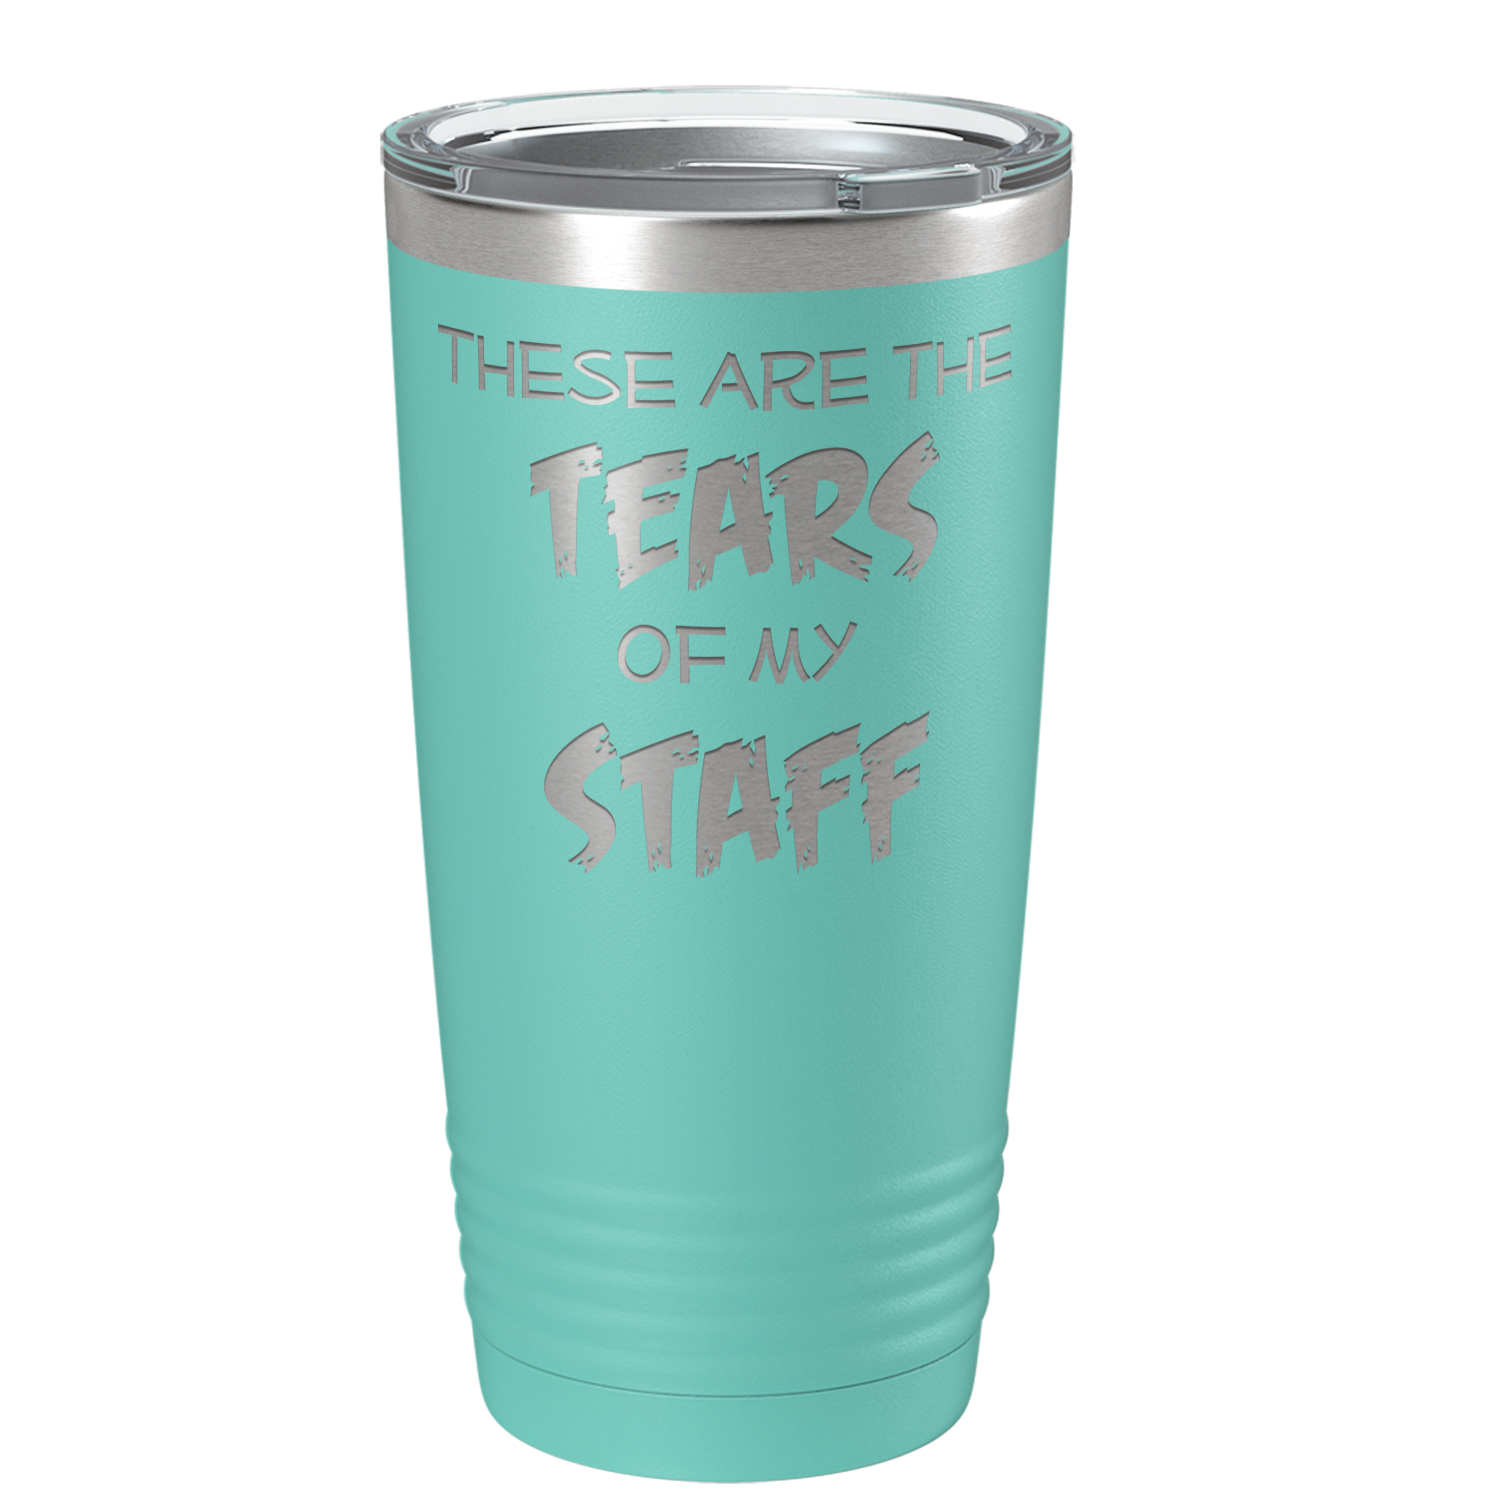 These are Tears of my Staff on Seafoam 20 oz Stainless Steel Ringneck Tumbler